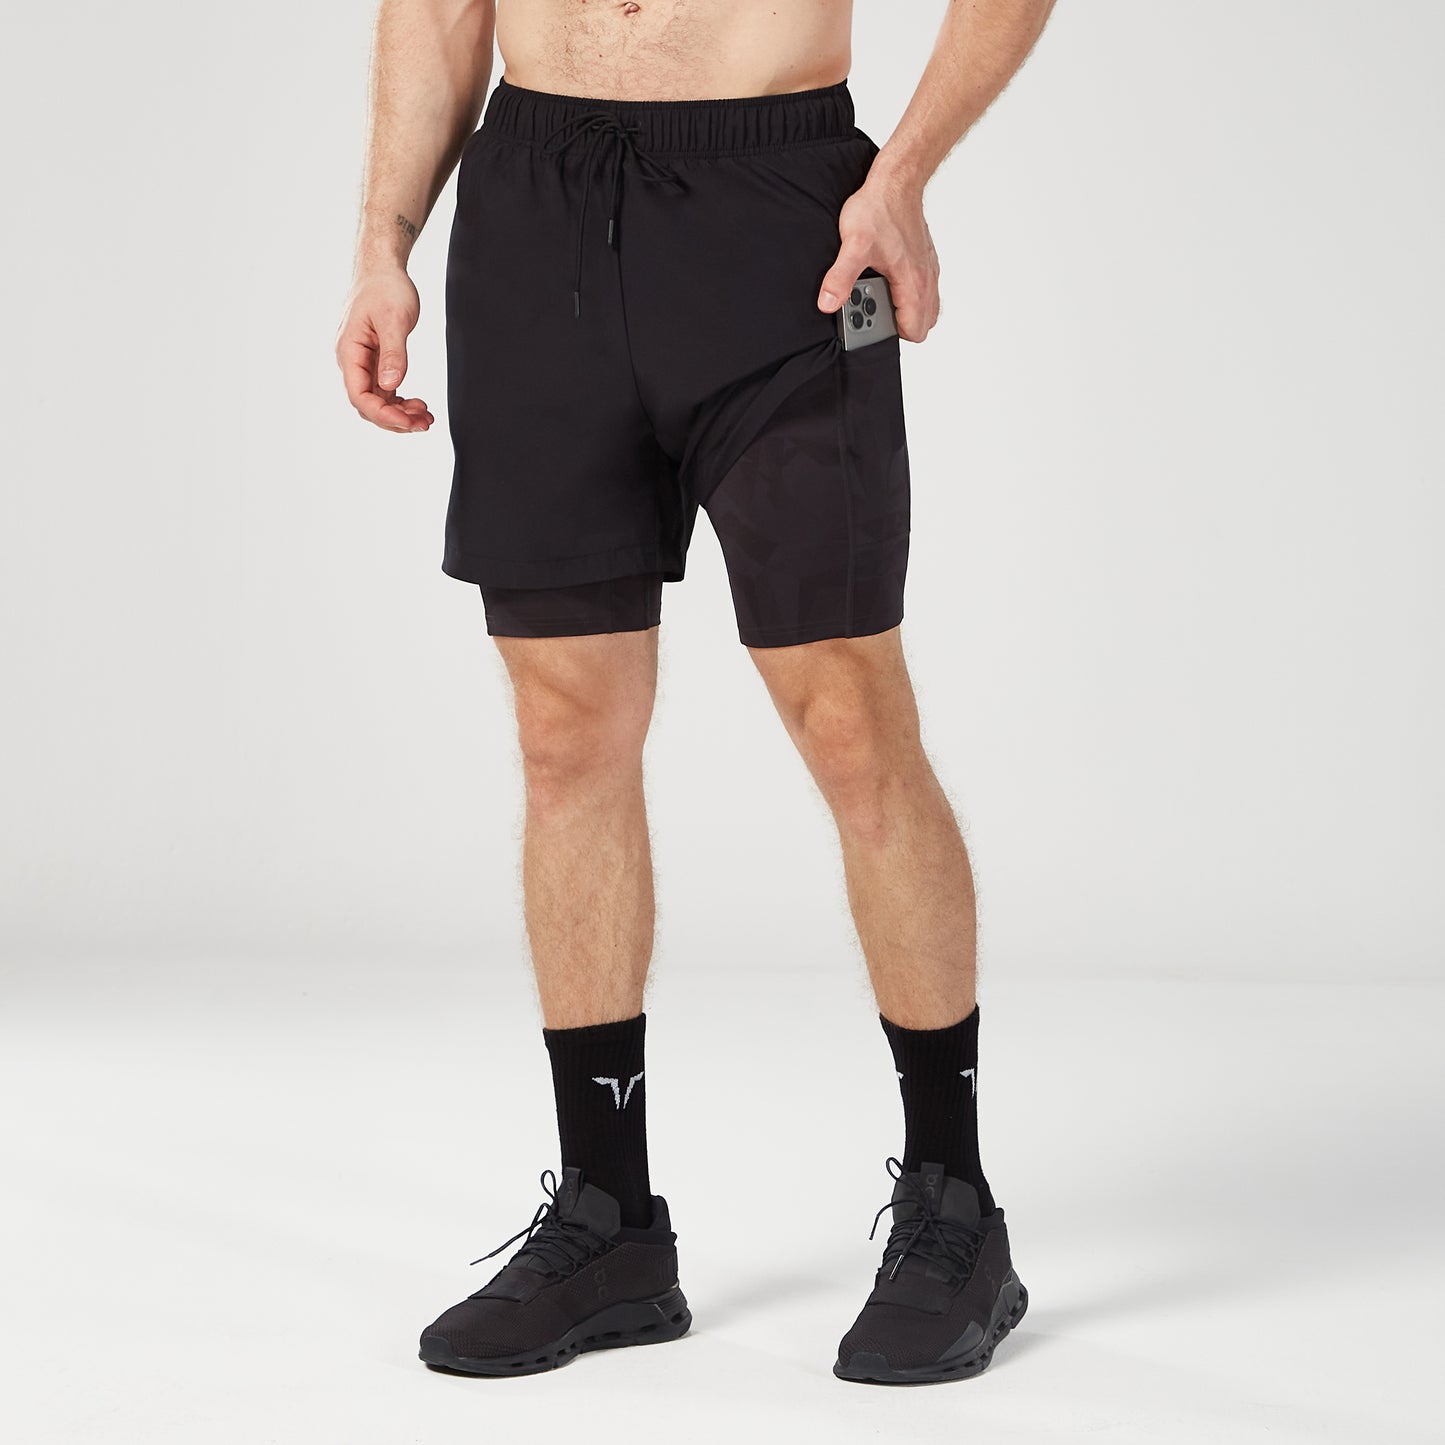 Limitless 2-in-1 7" Shorts - Black